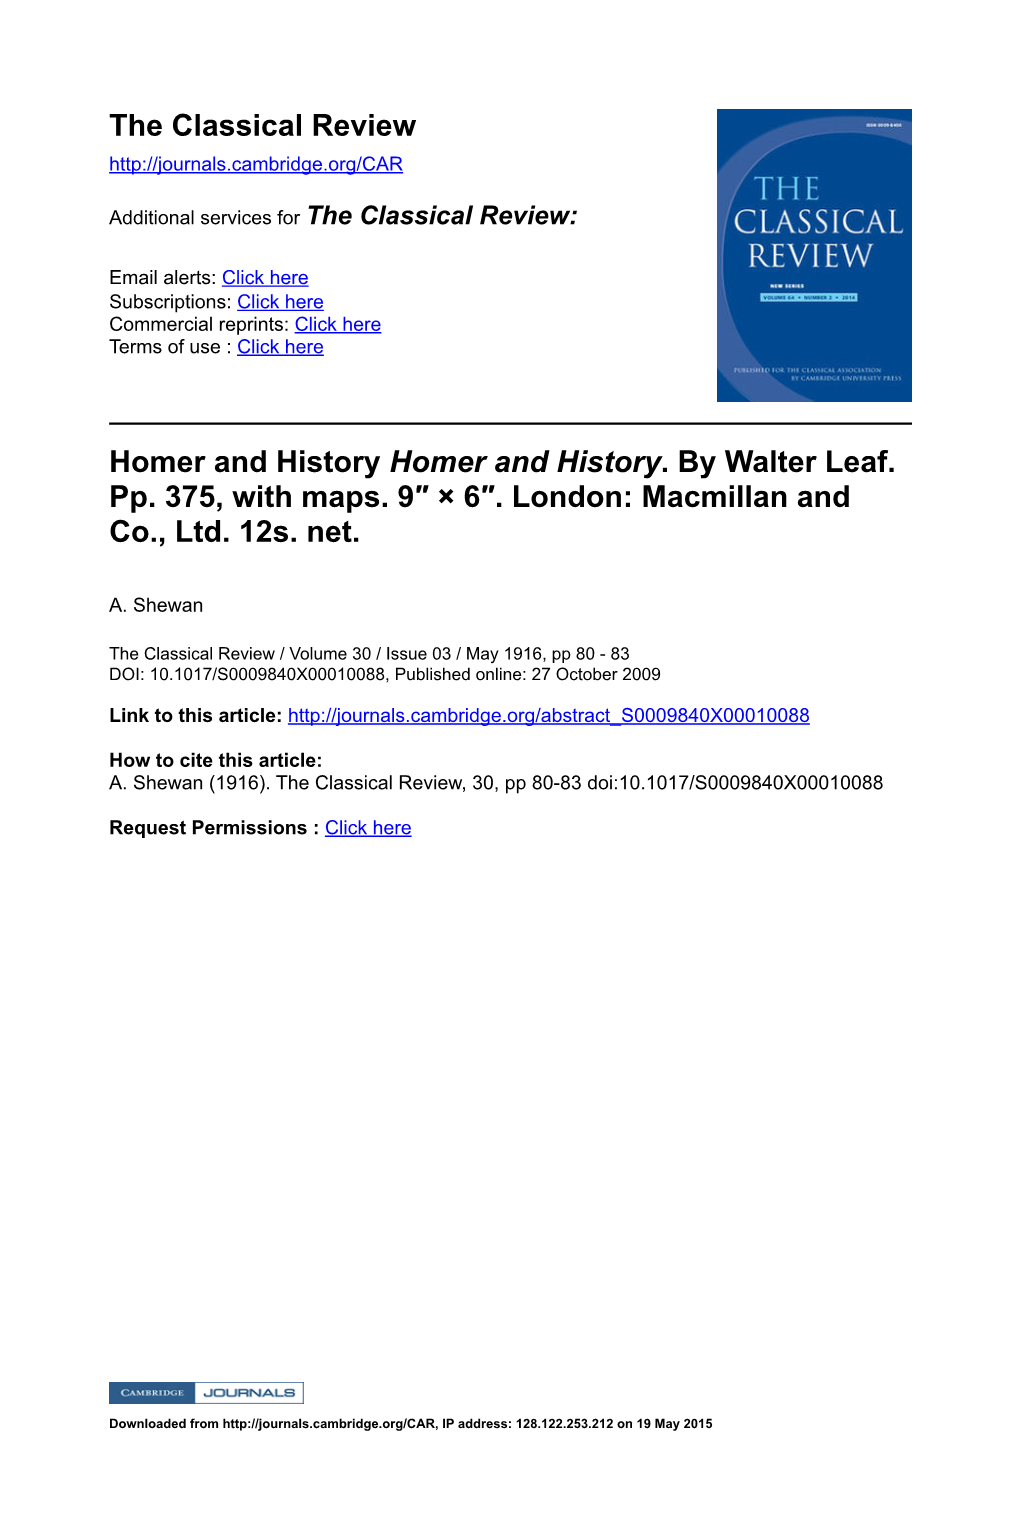 Homer and History Homer and History. by Walter Leaf. Pp. 375, with Maps